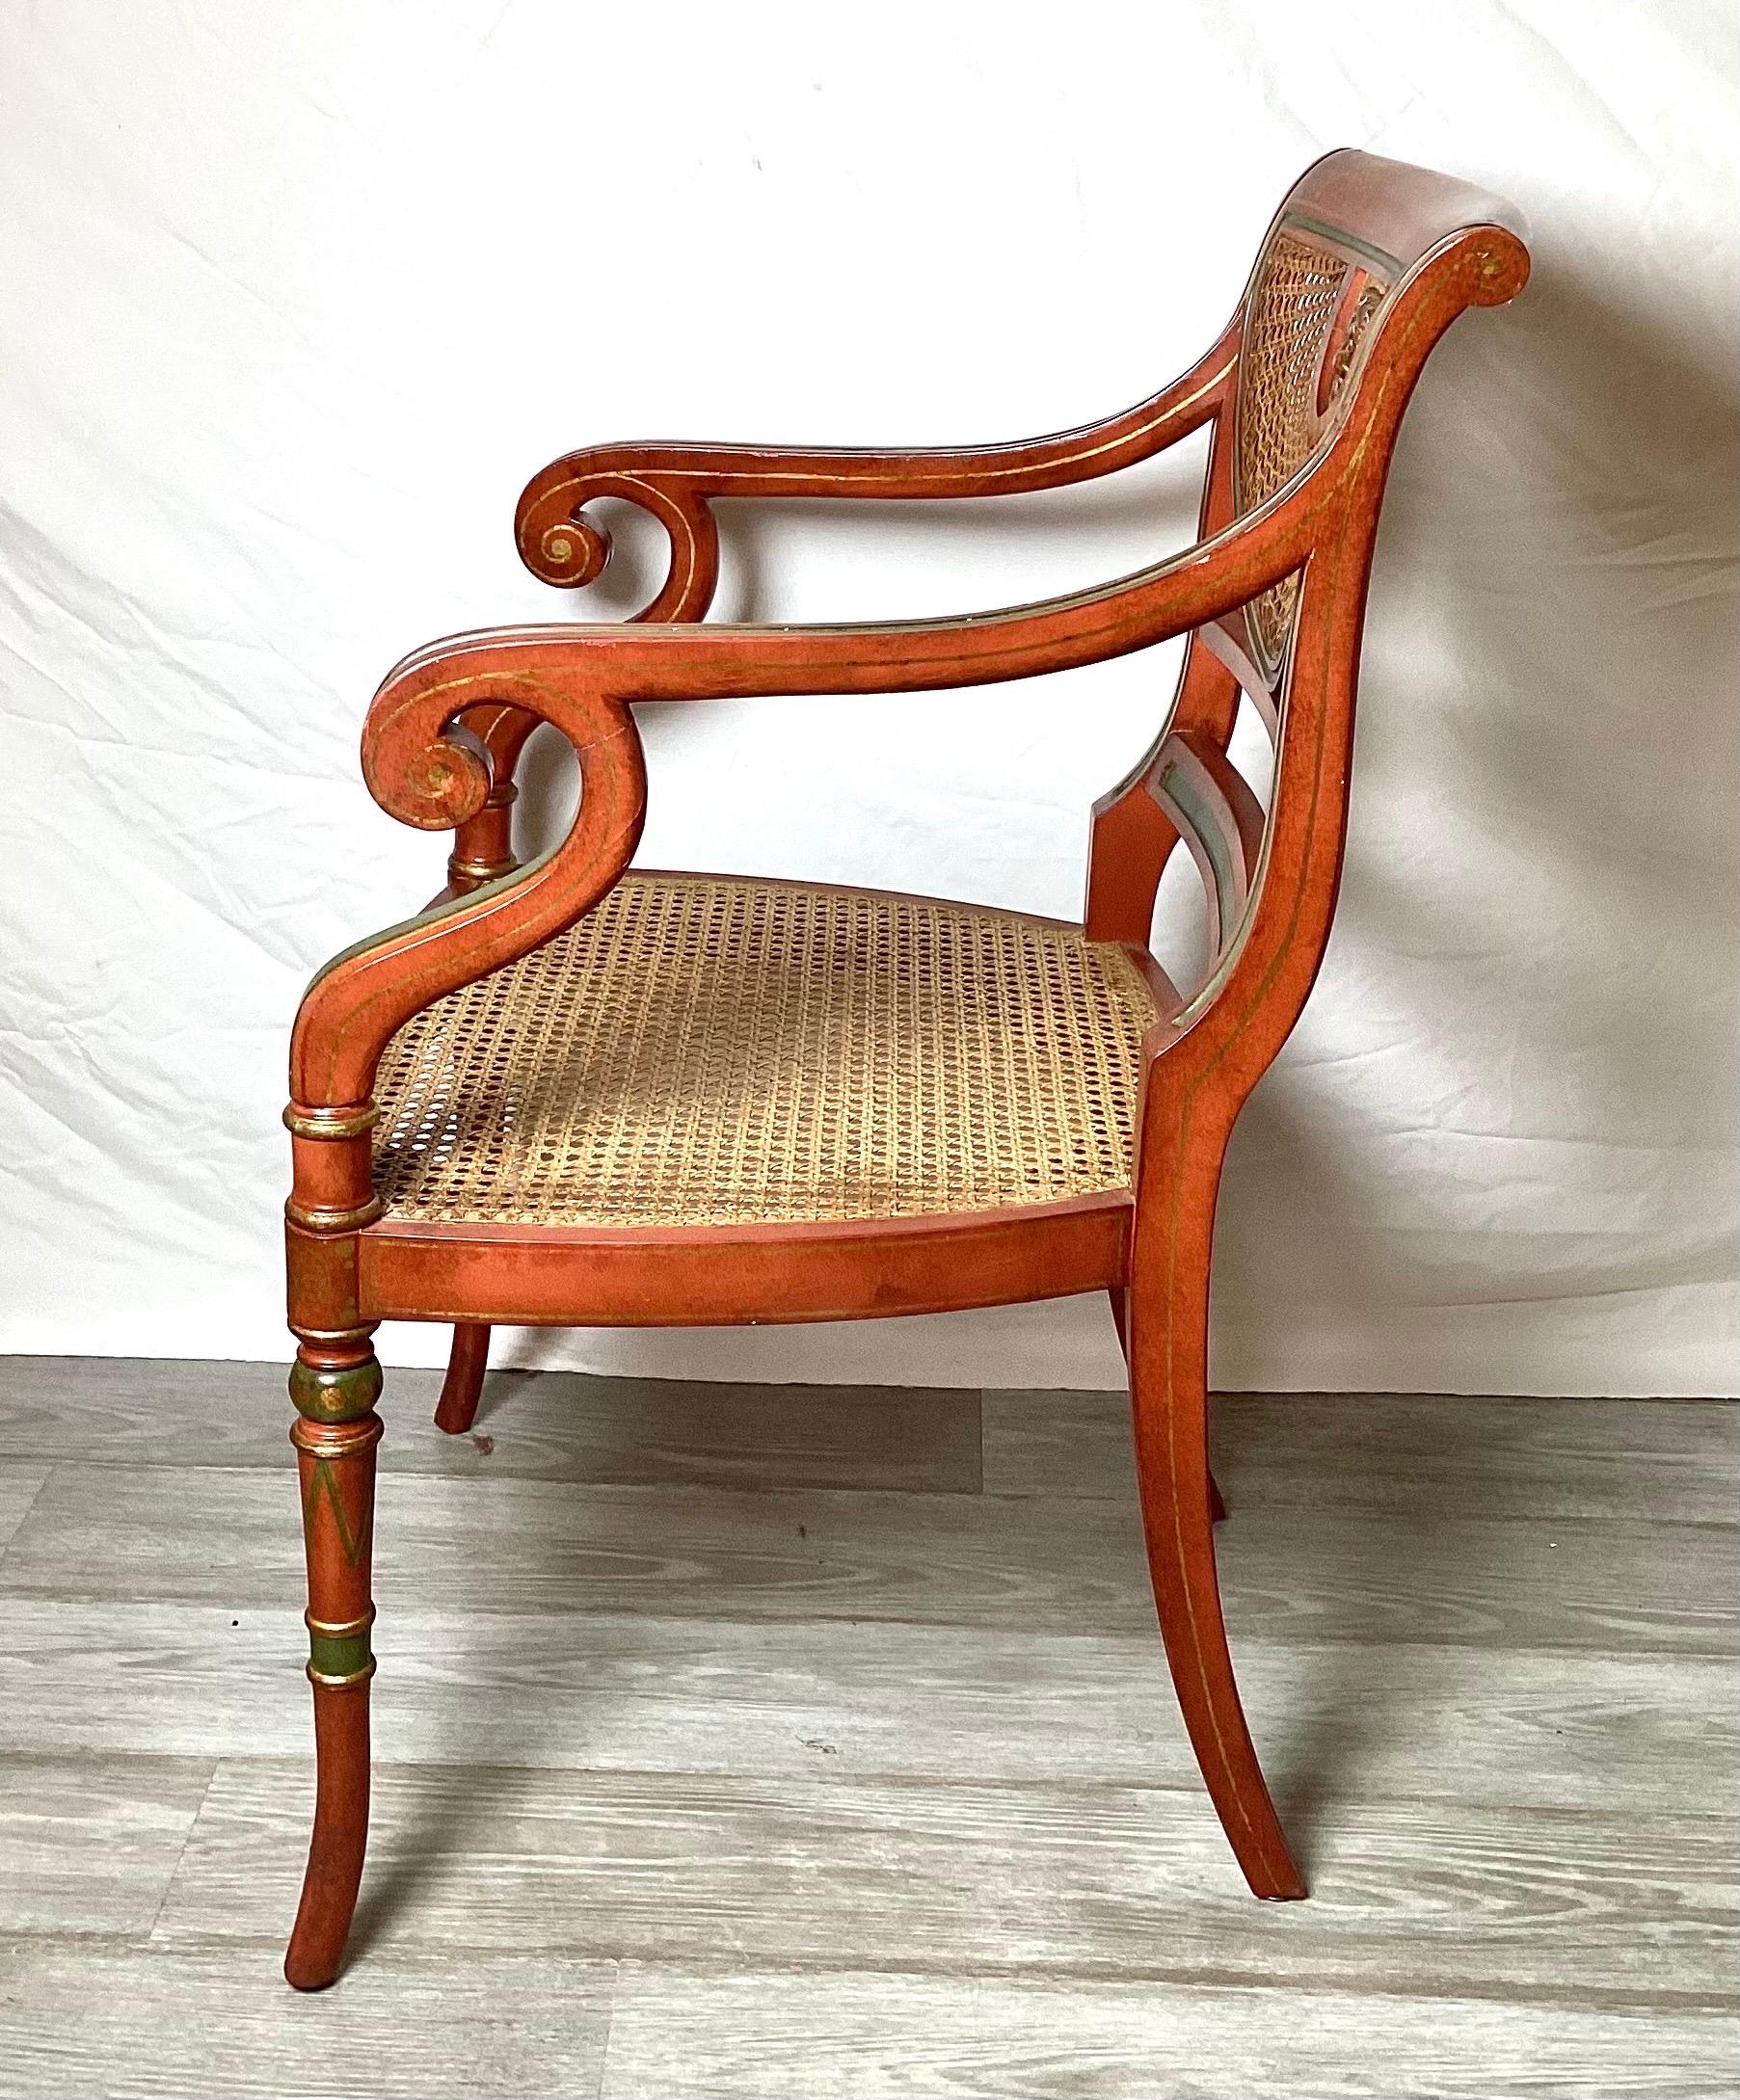 Smith and Watson Hand Painted Regency Arm Chair with Caned Seat In Good Condition For Sale In Lambertville, NJ